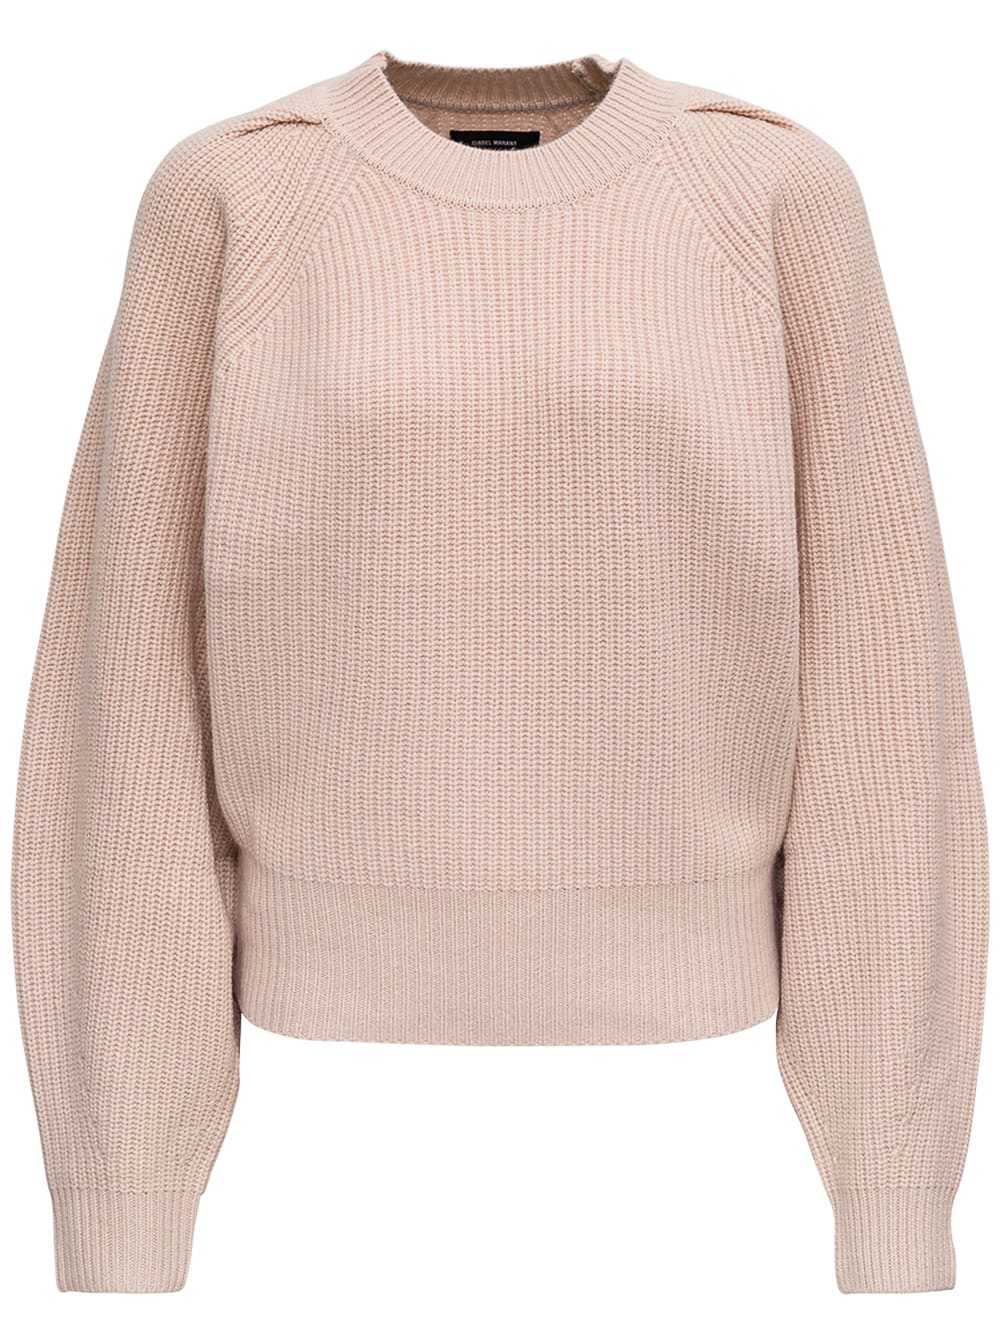 Isabel Marant Billie Wool And Cashmere Long-sleeved Sweater